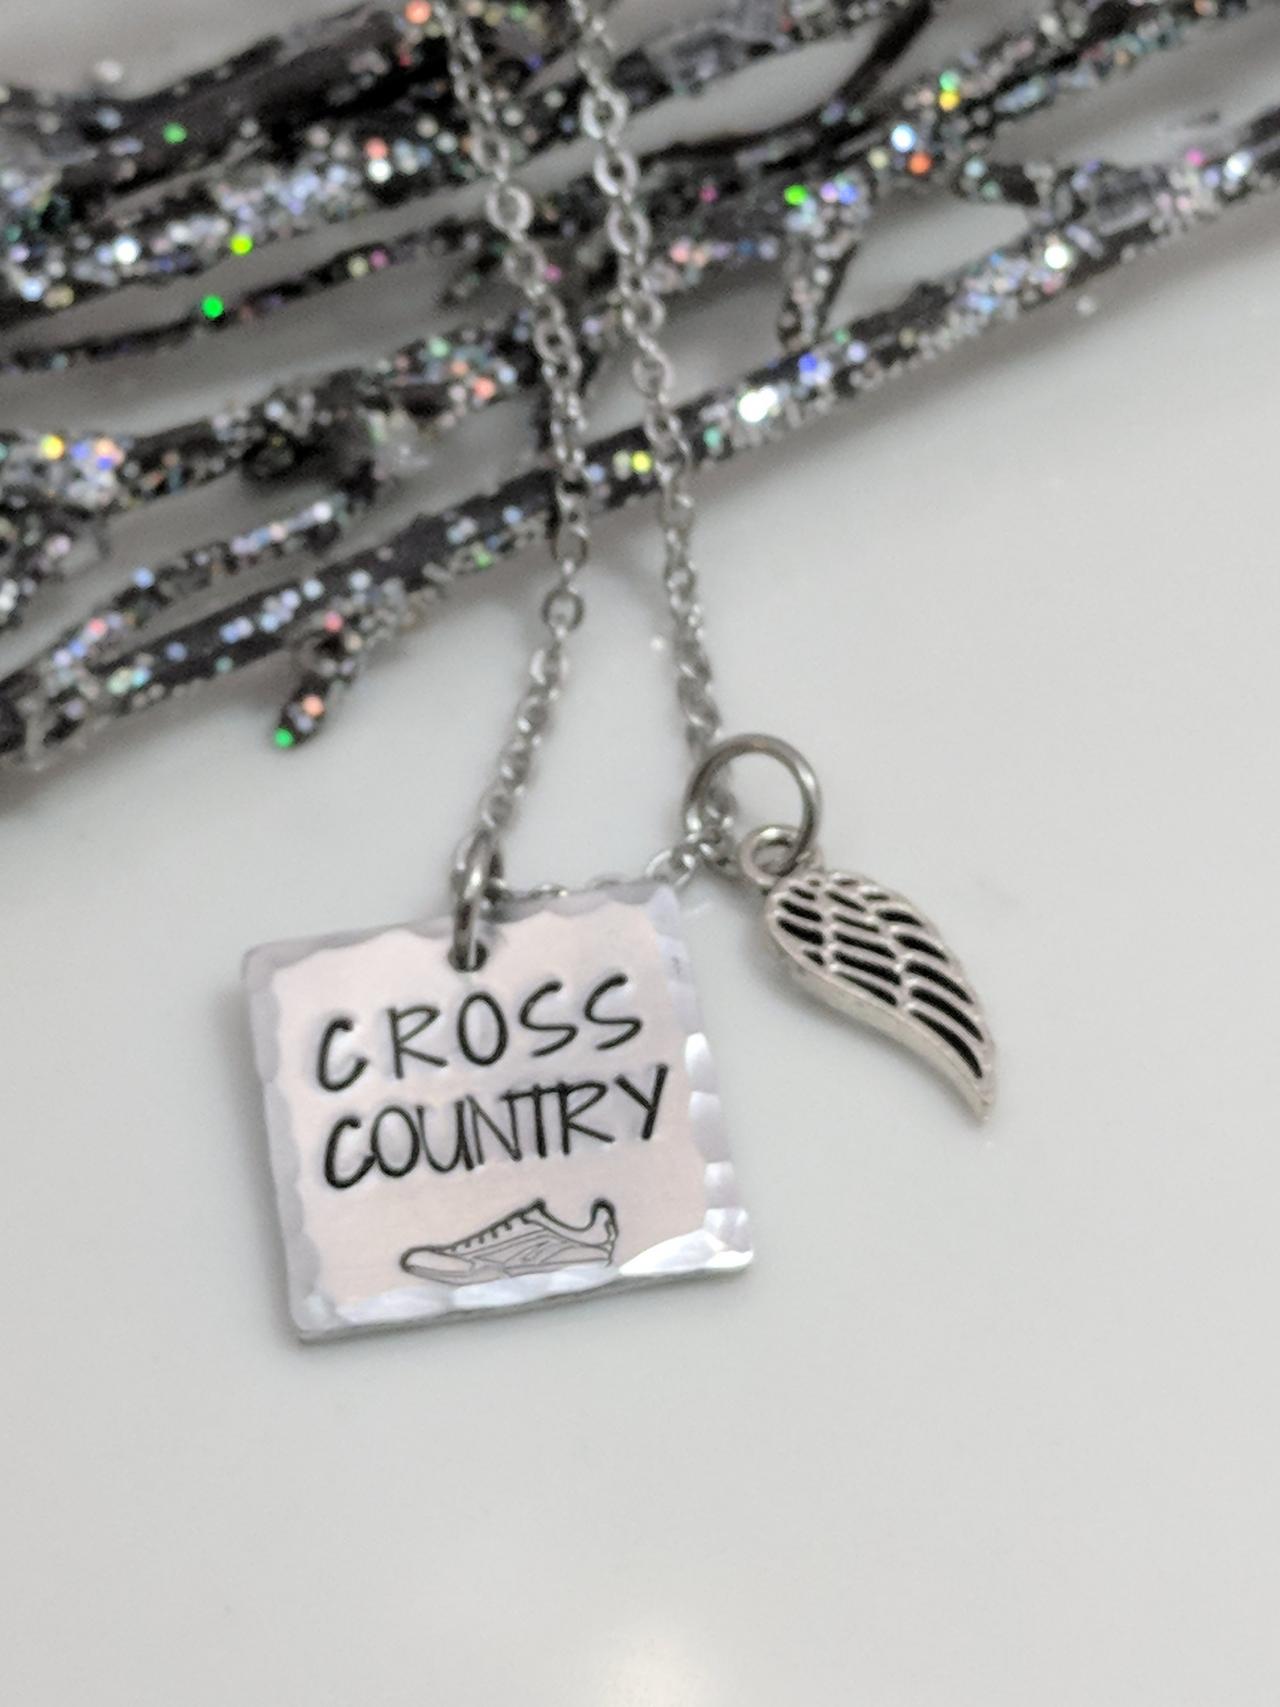 Hand Stamped Necklace Cross Country Runners - Hand Stamped Jewelry - Cross Country Gifts - Xc Team - Sole Sister - Team Gifts - Coach - Run Race